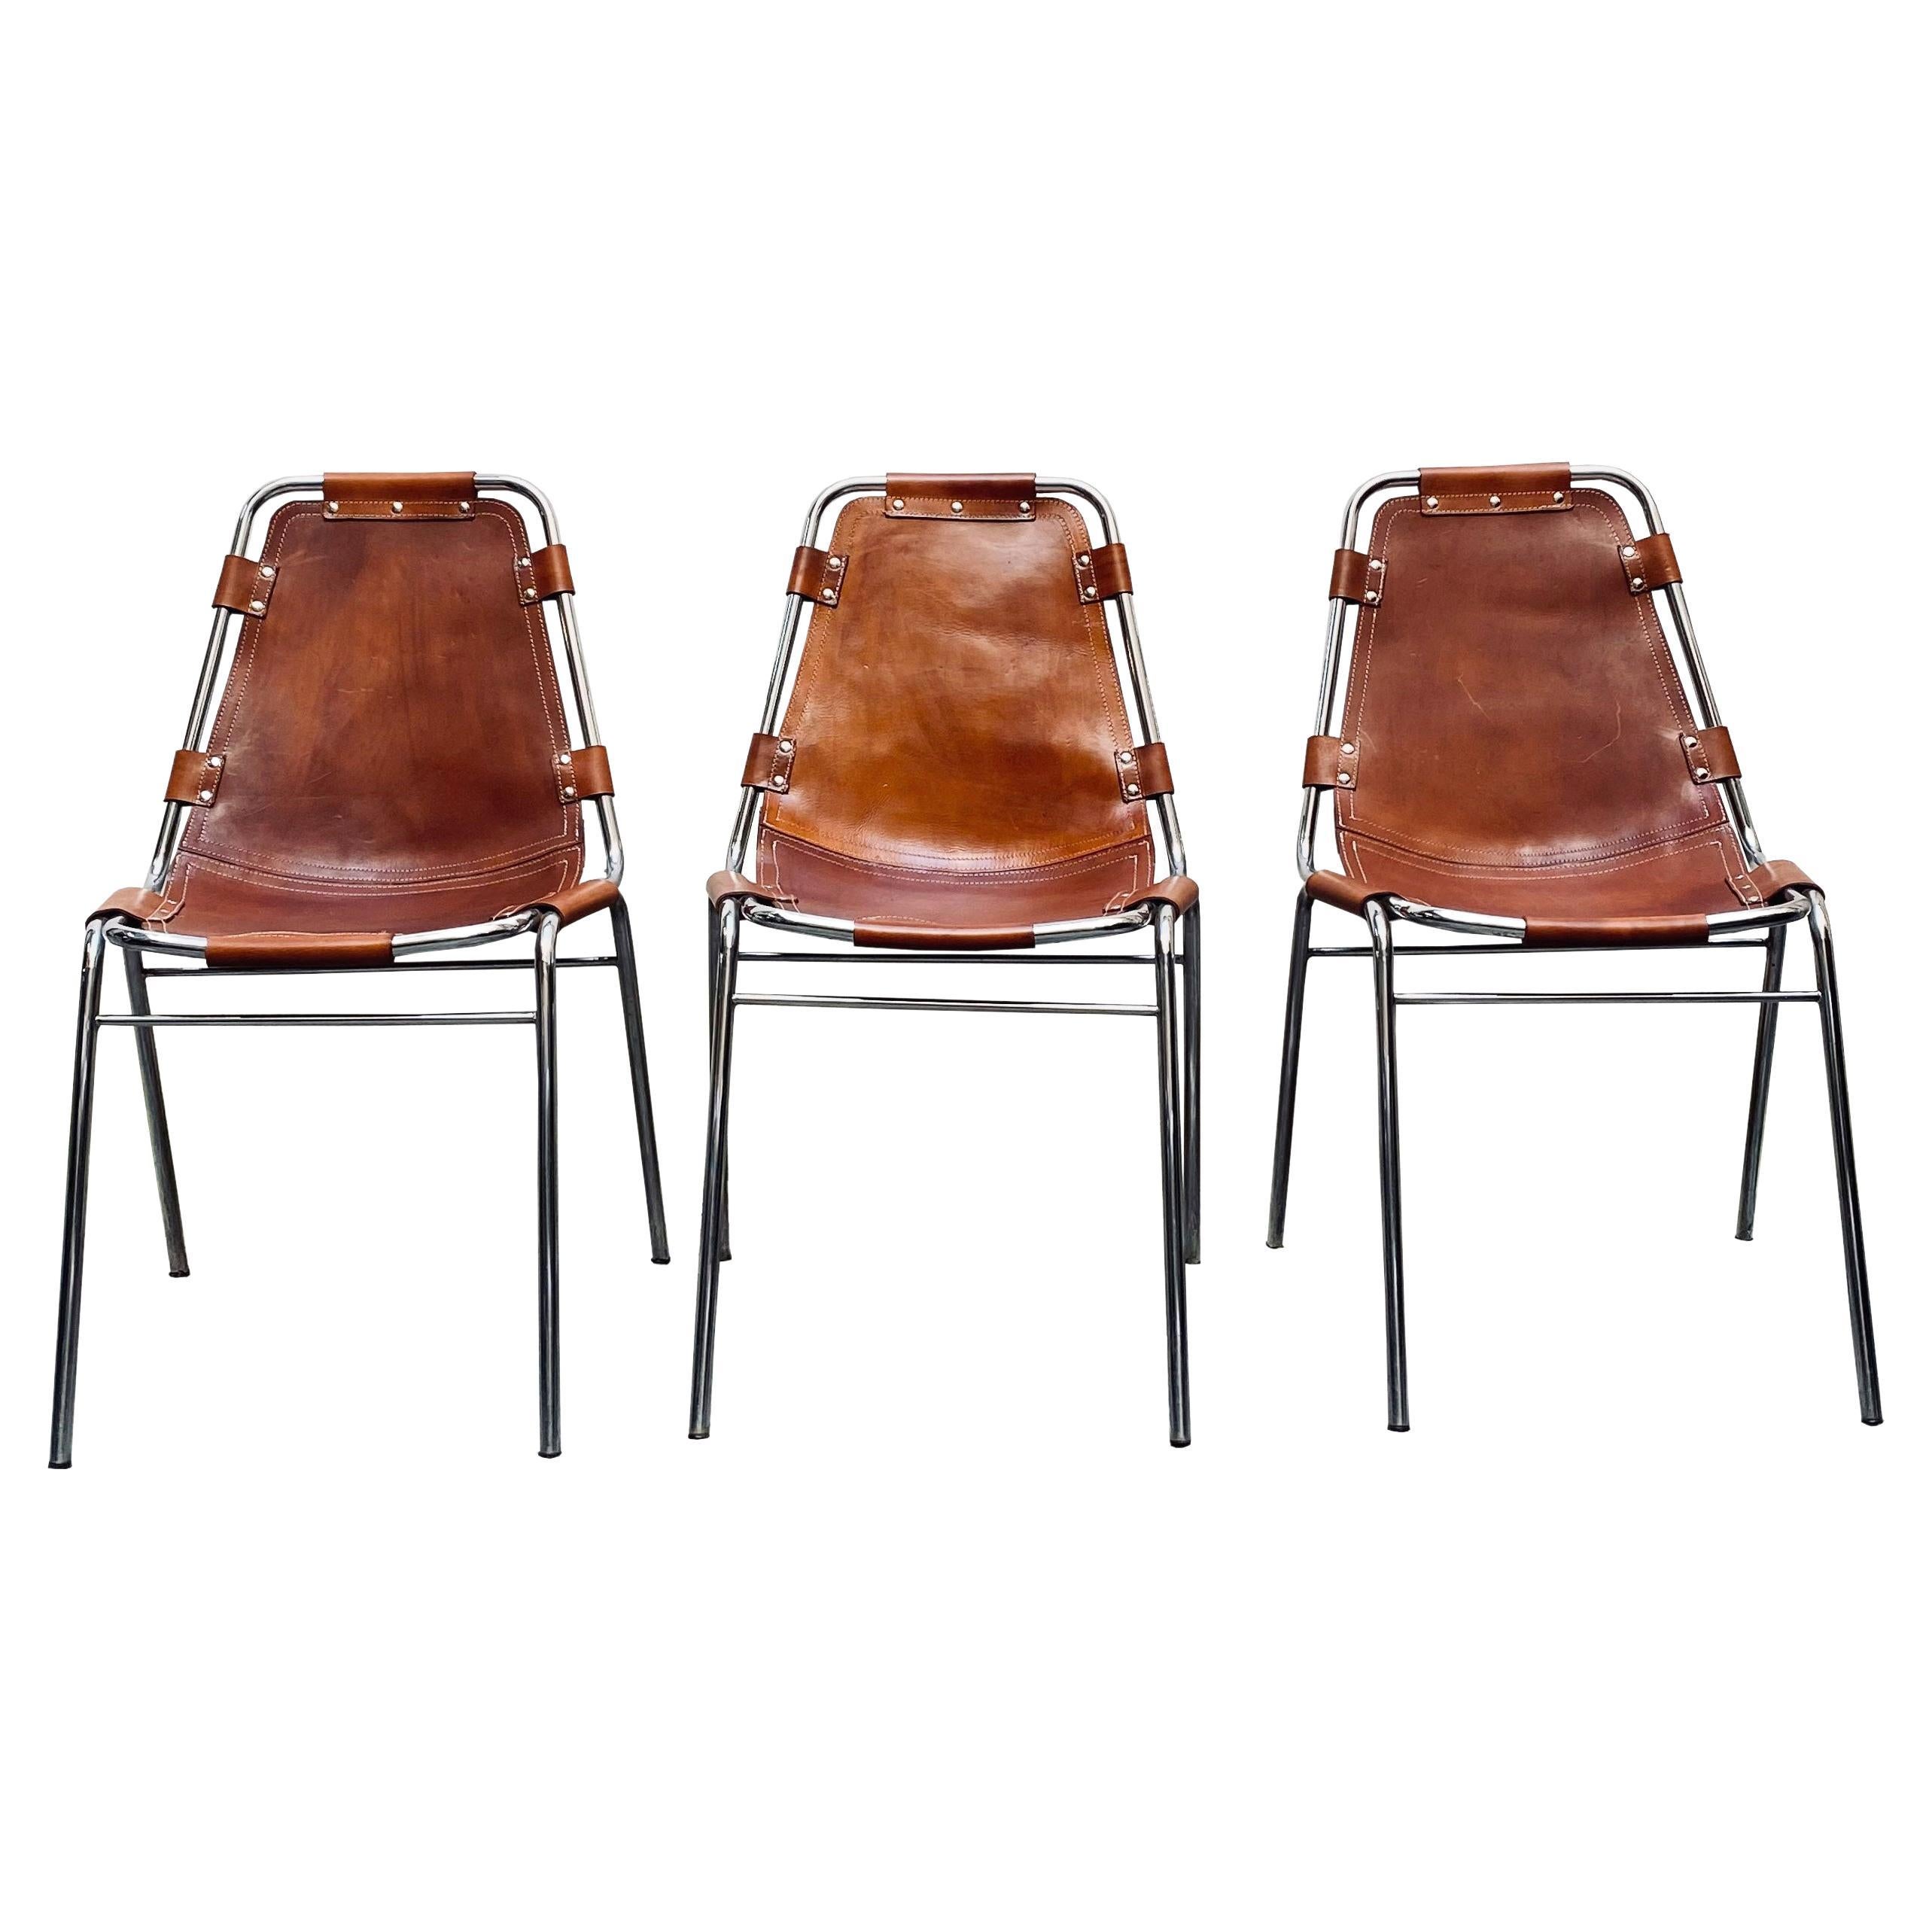 Chairs 'Les Arcs' Charlotte Perriand, Cognac Leather Chromed Metal, Italy 1970s